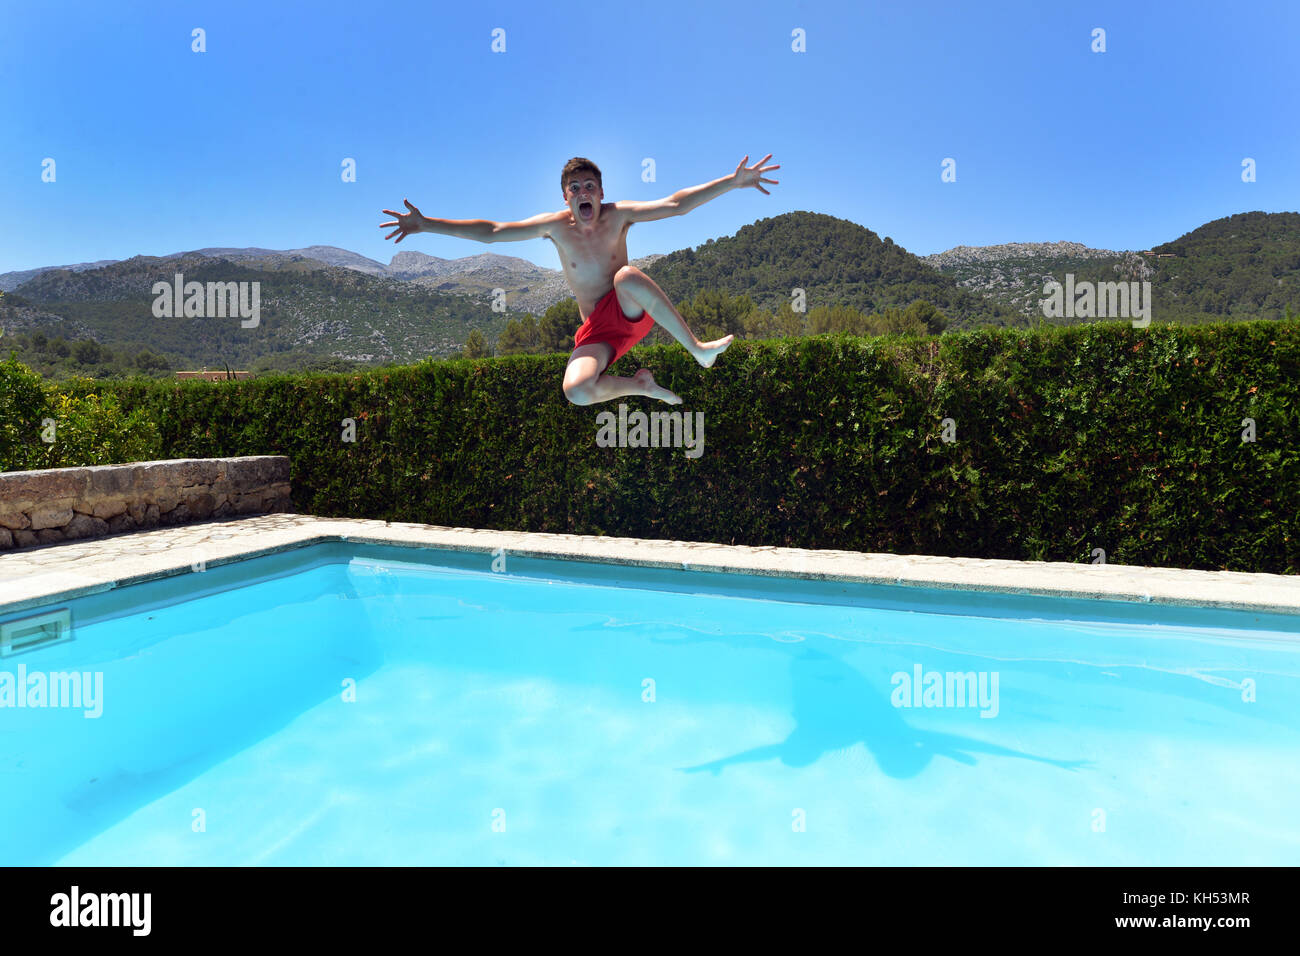 Teenage boy jumping into a private villa swimming pool Stock Photo